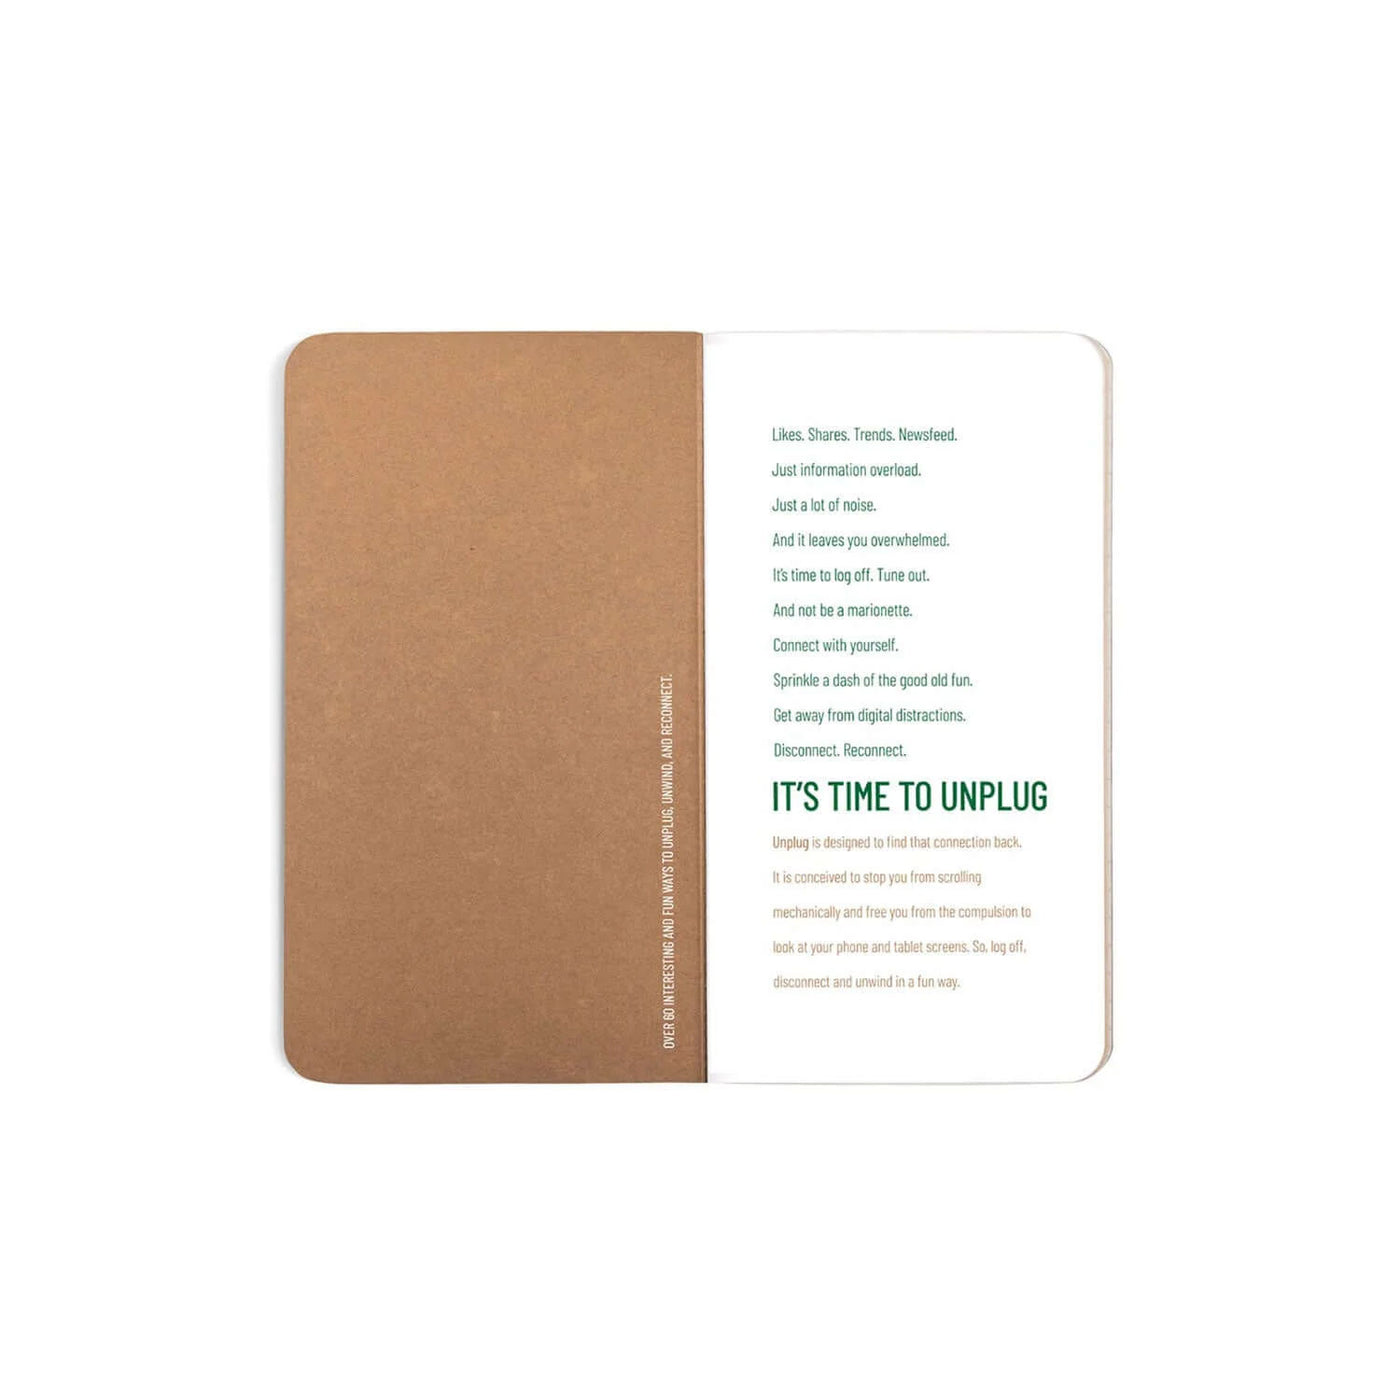 Pennline Quikfill Notebook Refill For Quikrite, Neutral - Set Of 2 9